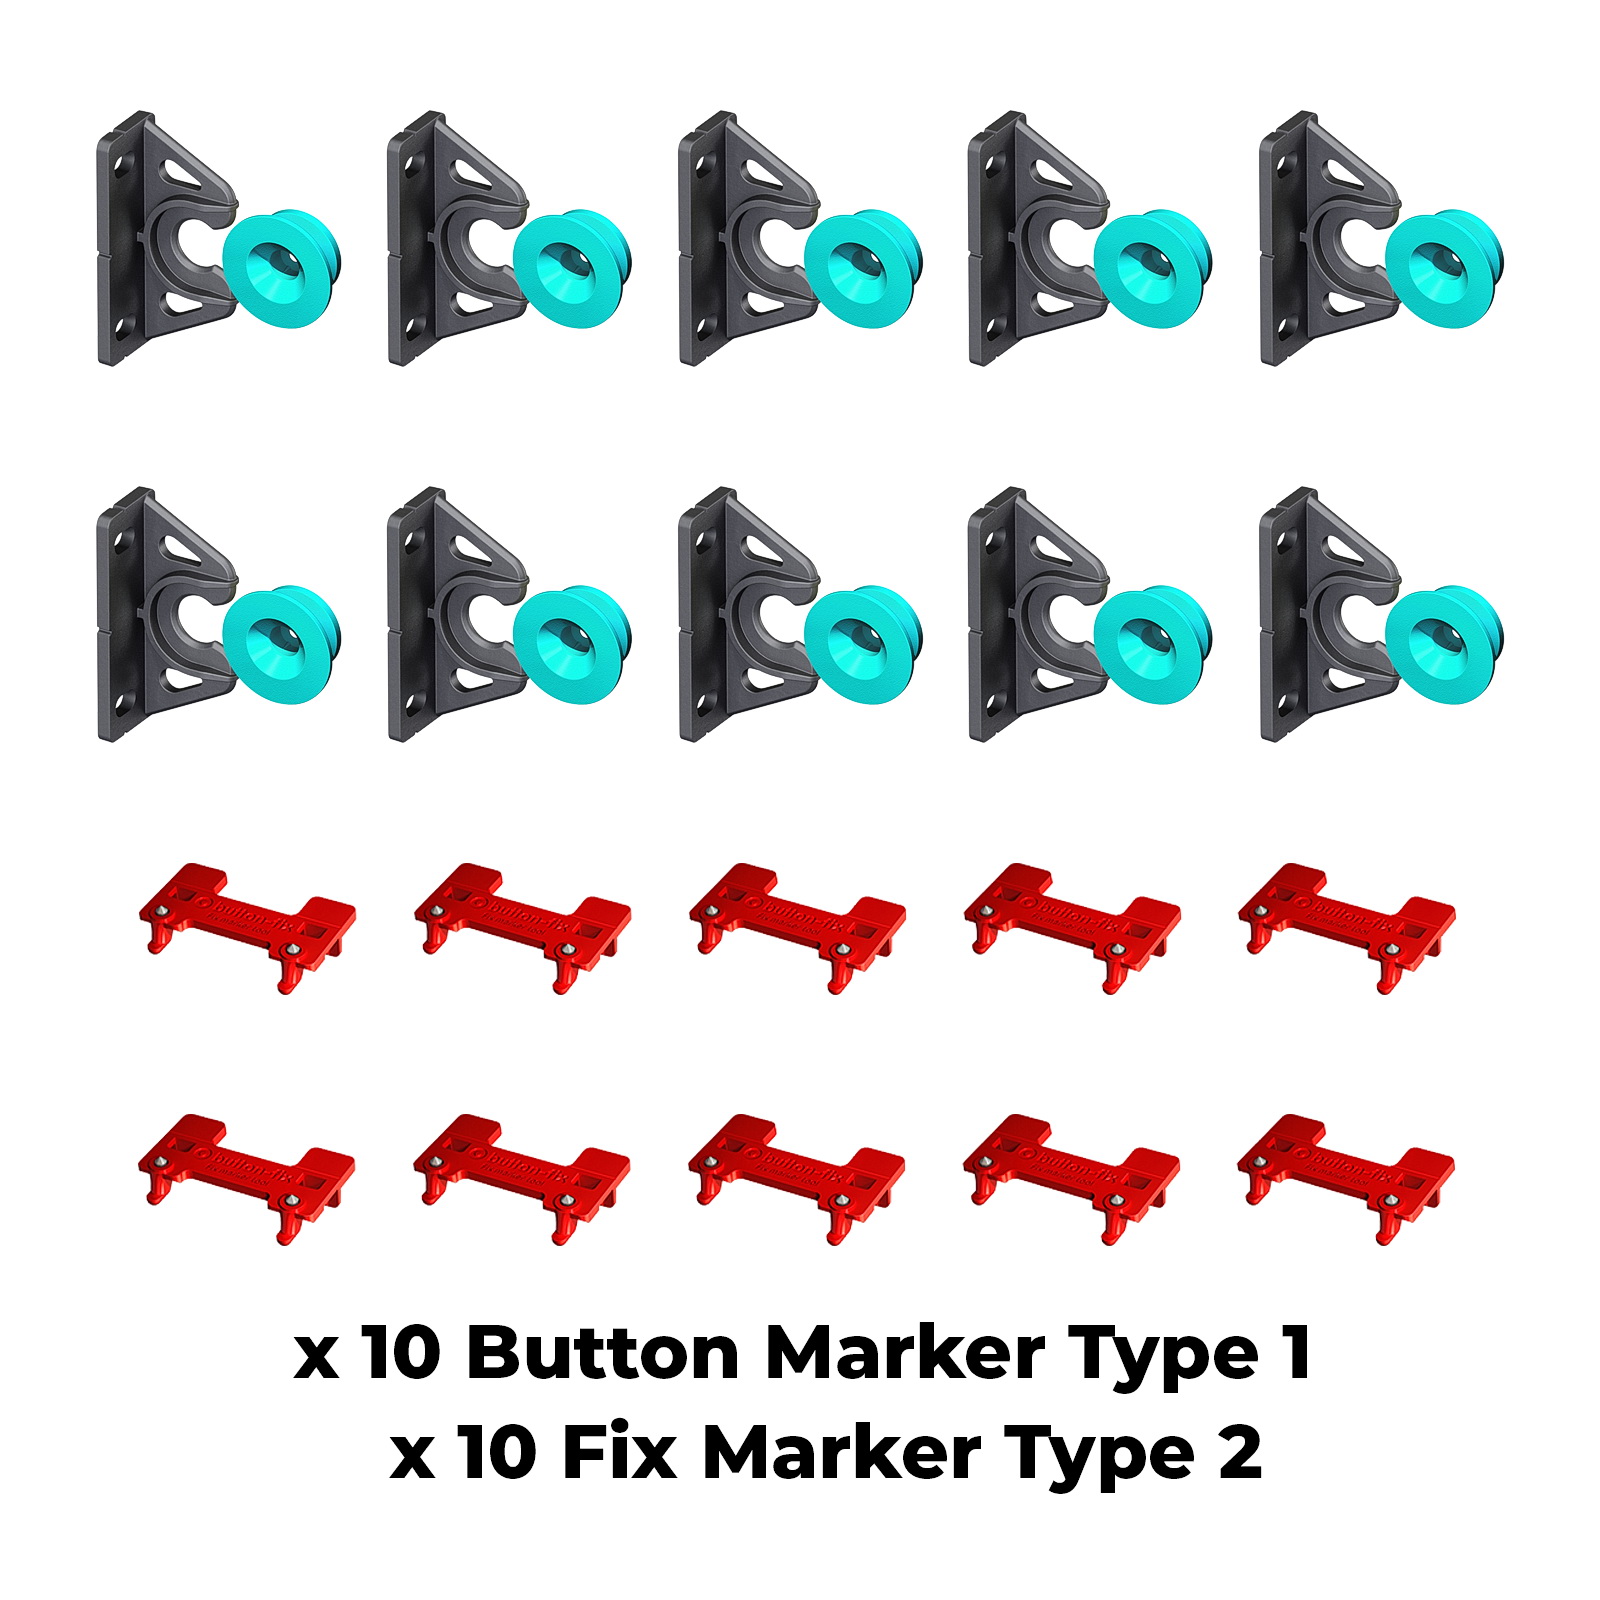 Button Fix Type 1 Bonded Bracket Marker Guide Kit Connecting Panel x50 10 Tool 